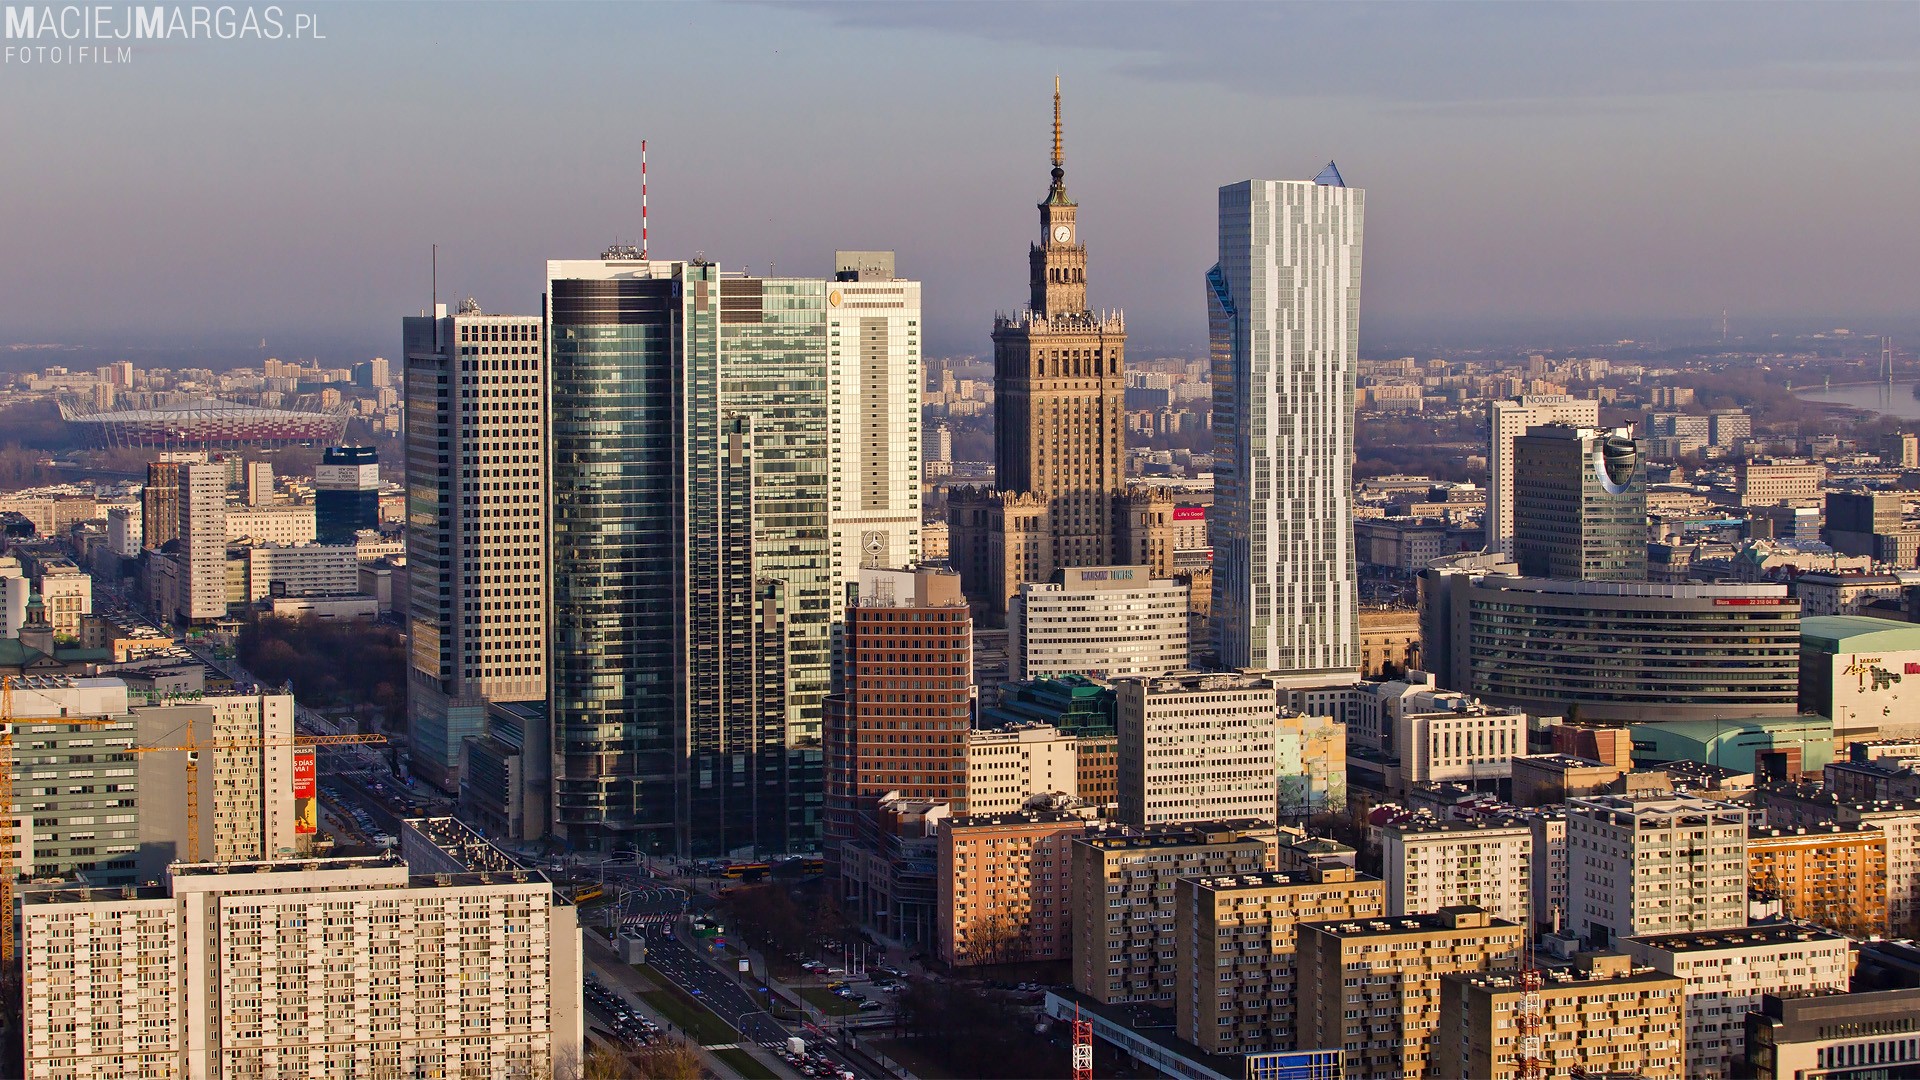 Poland Warsaw Skyscraper Cityscape Polish Capital Palace Of Culture And Science 1920x1080